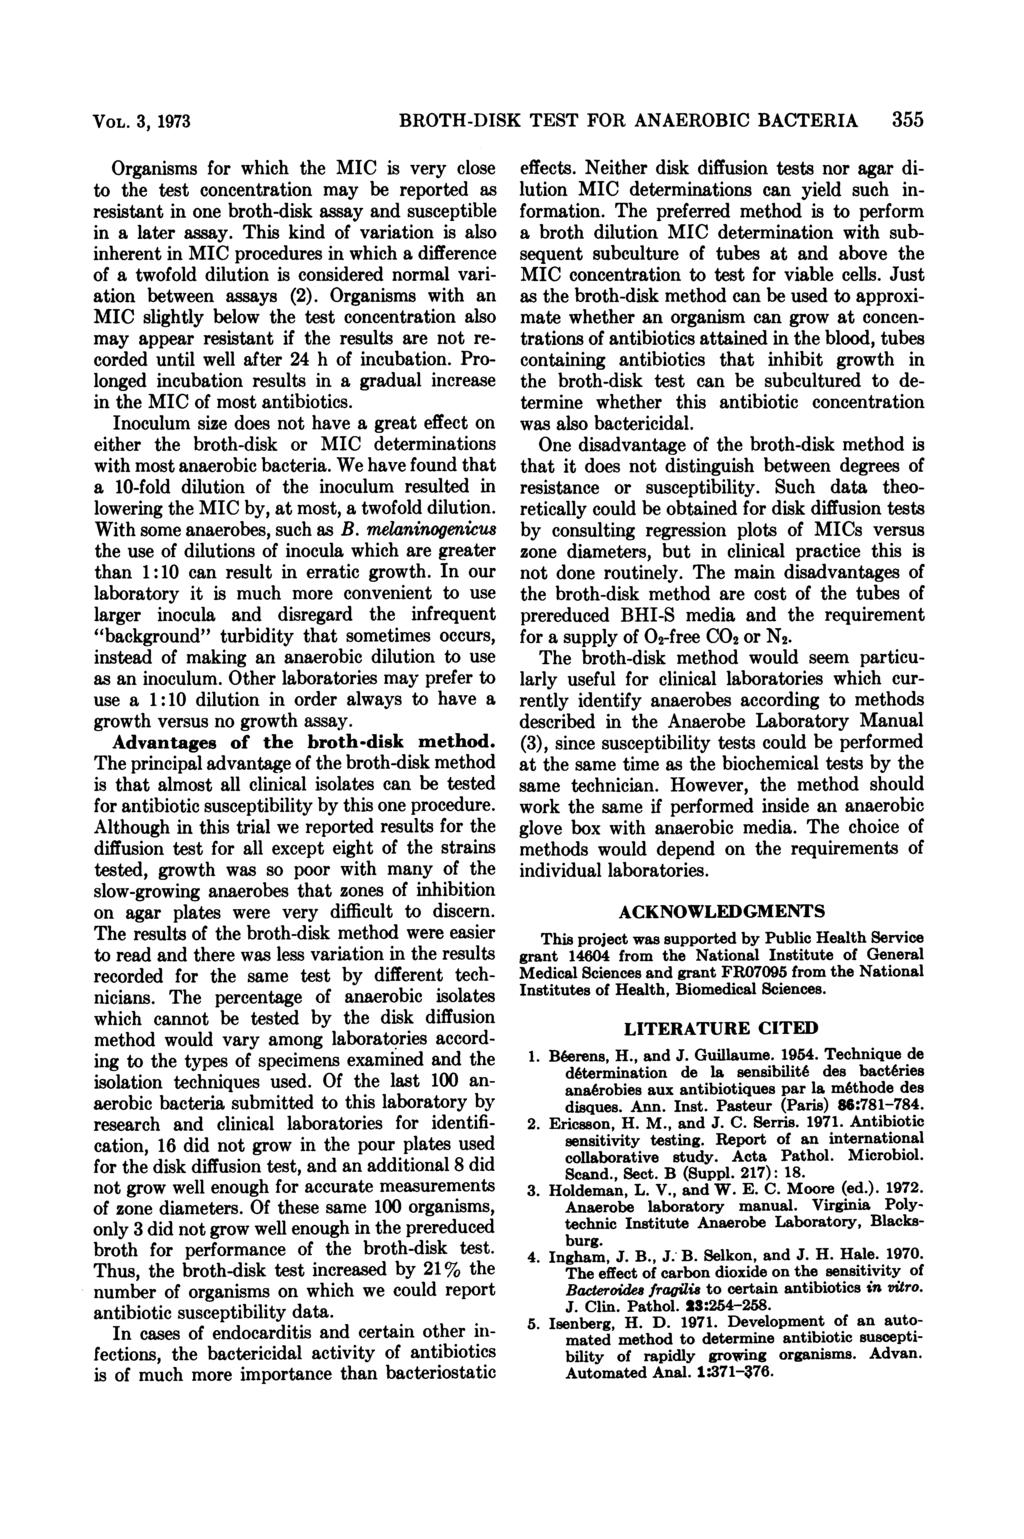 VOL. 3, 1973 Organisms for which the MIC is very close to the test concentration may be reported as resistant in one broth-disk assay and susceptible in a later assay.